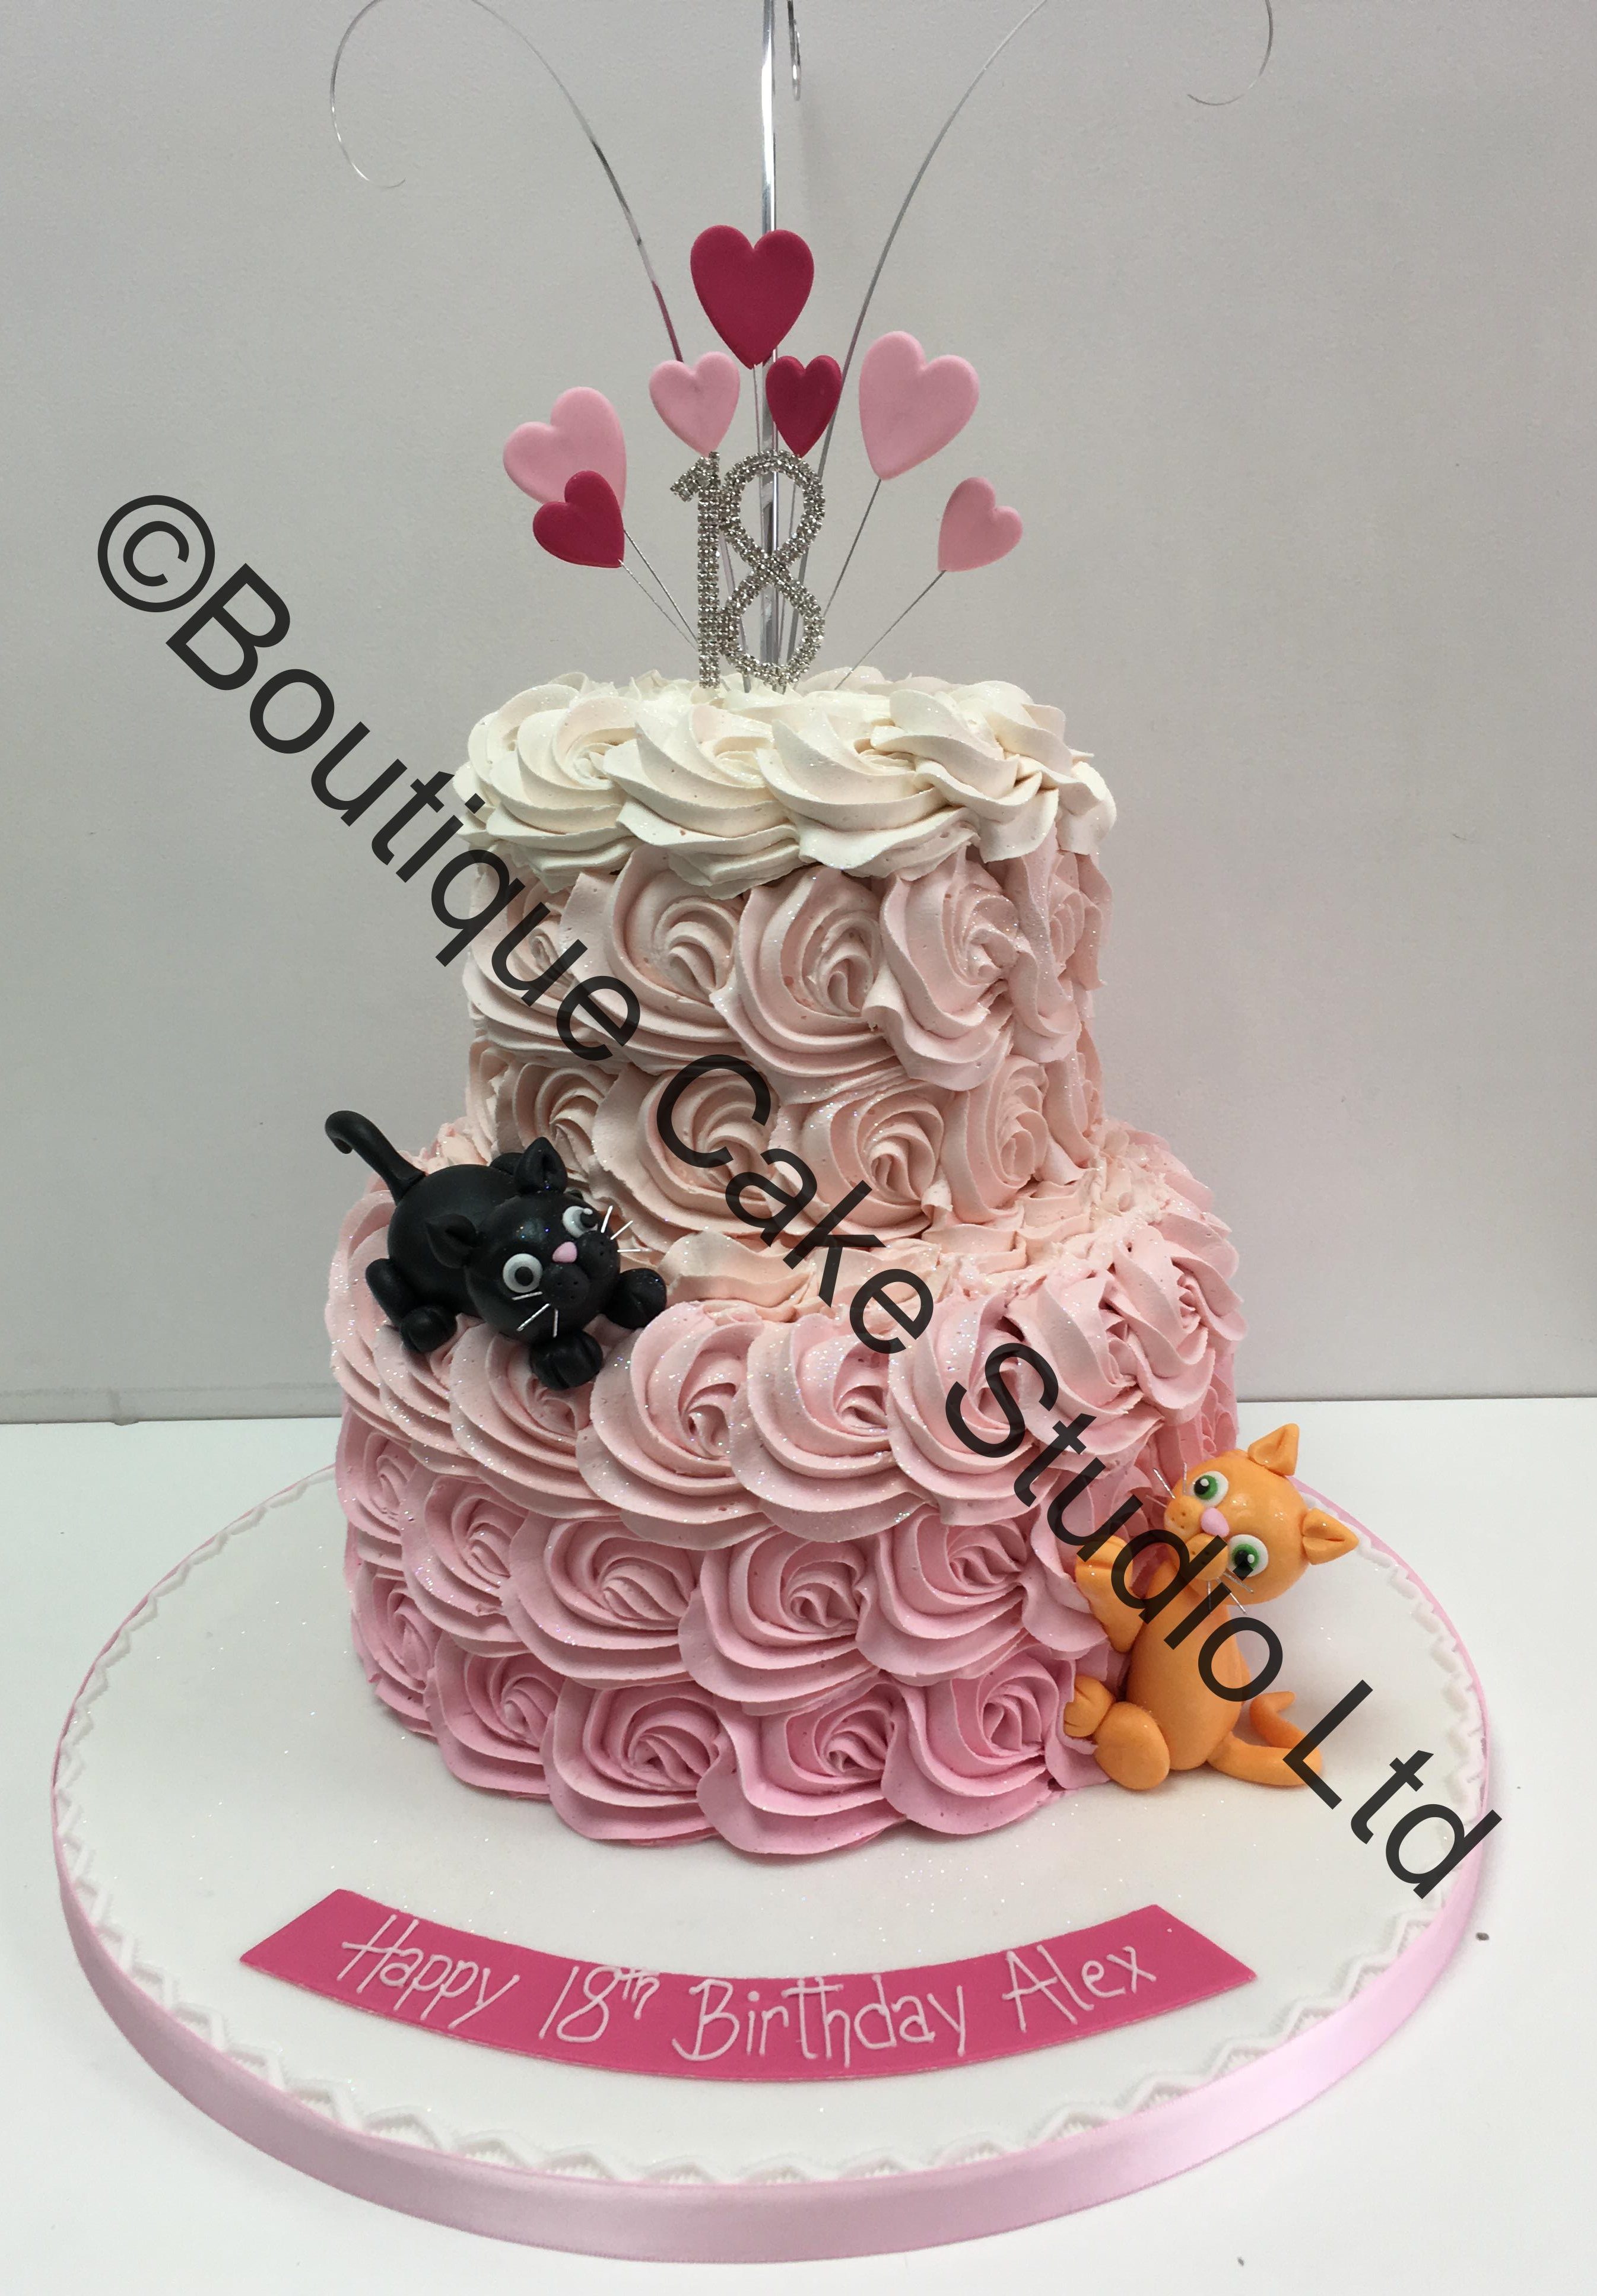 2 tier Buttercream Swirl Cake with Cats